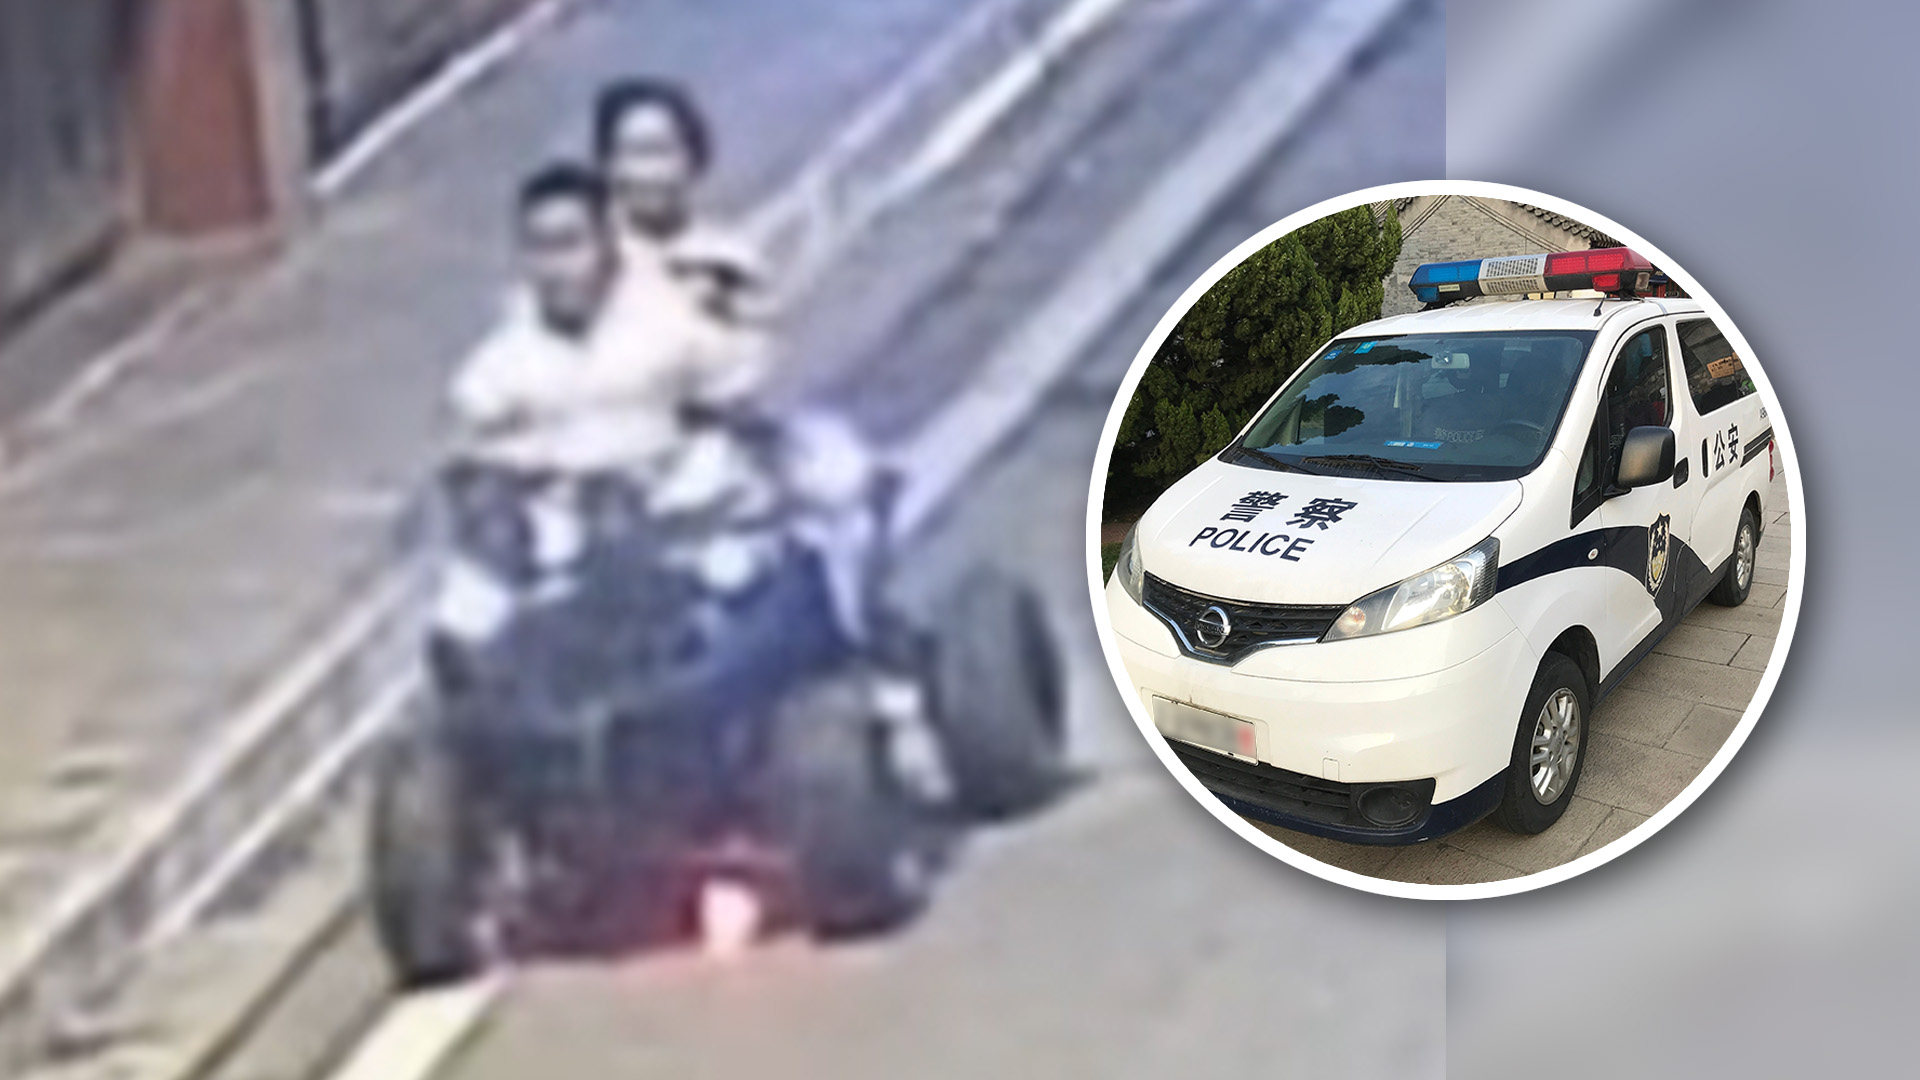 Millions of people on mainland social media have been delighted by the tale of three young children stopped by police while driving a toy electric car on a main road in China. Photo: SCMP composite/Shutterstock/Douyin